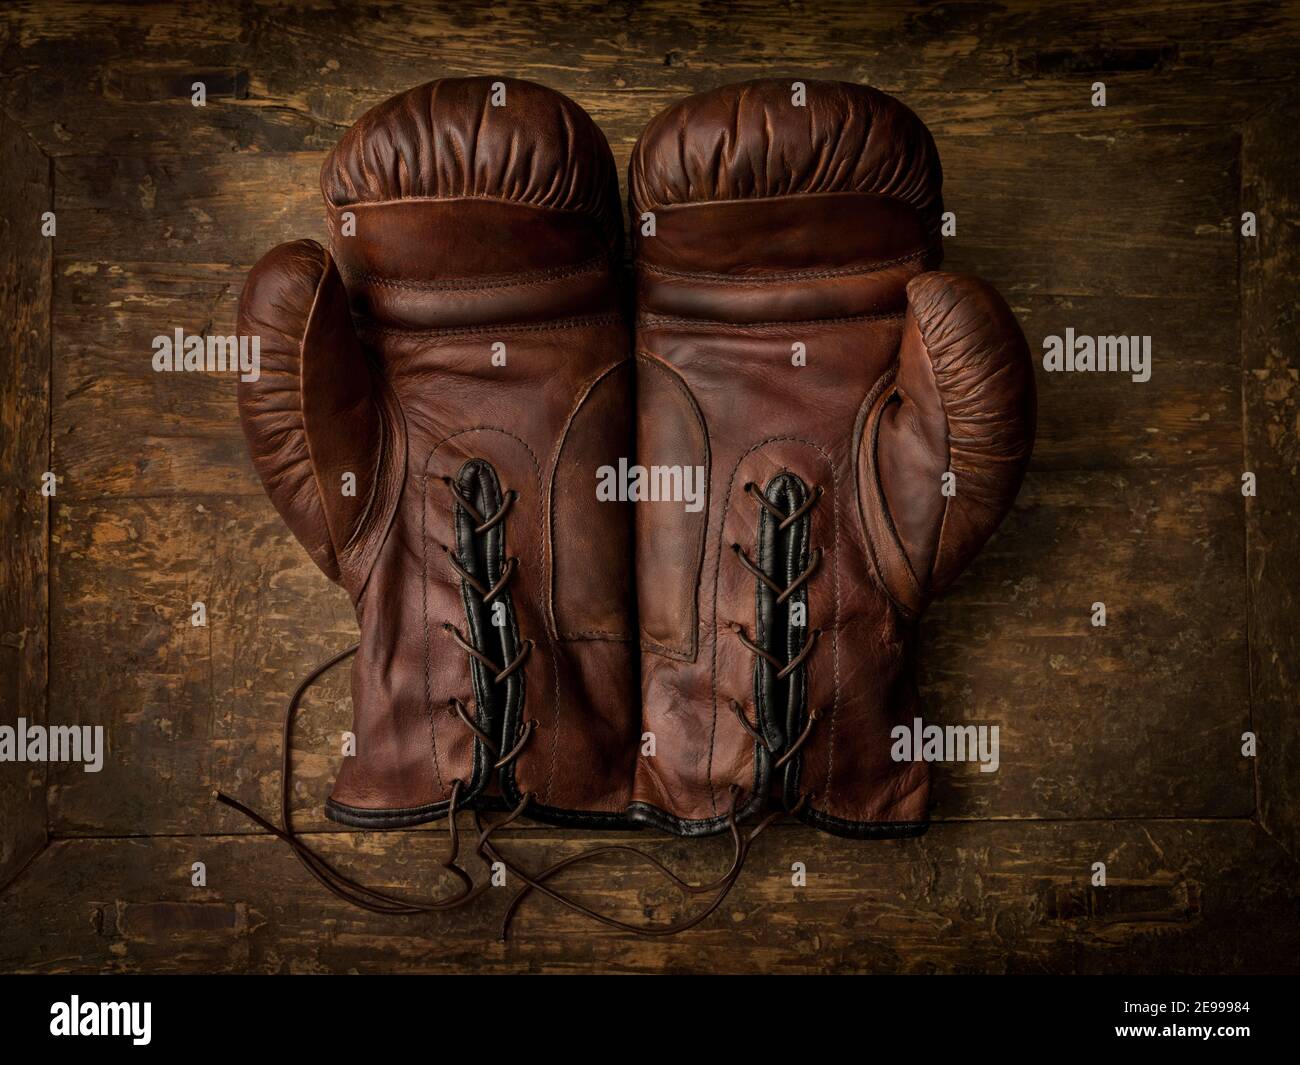 Pair of old brown leather boxing gloves lying on an antique wooden table Stock Photo